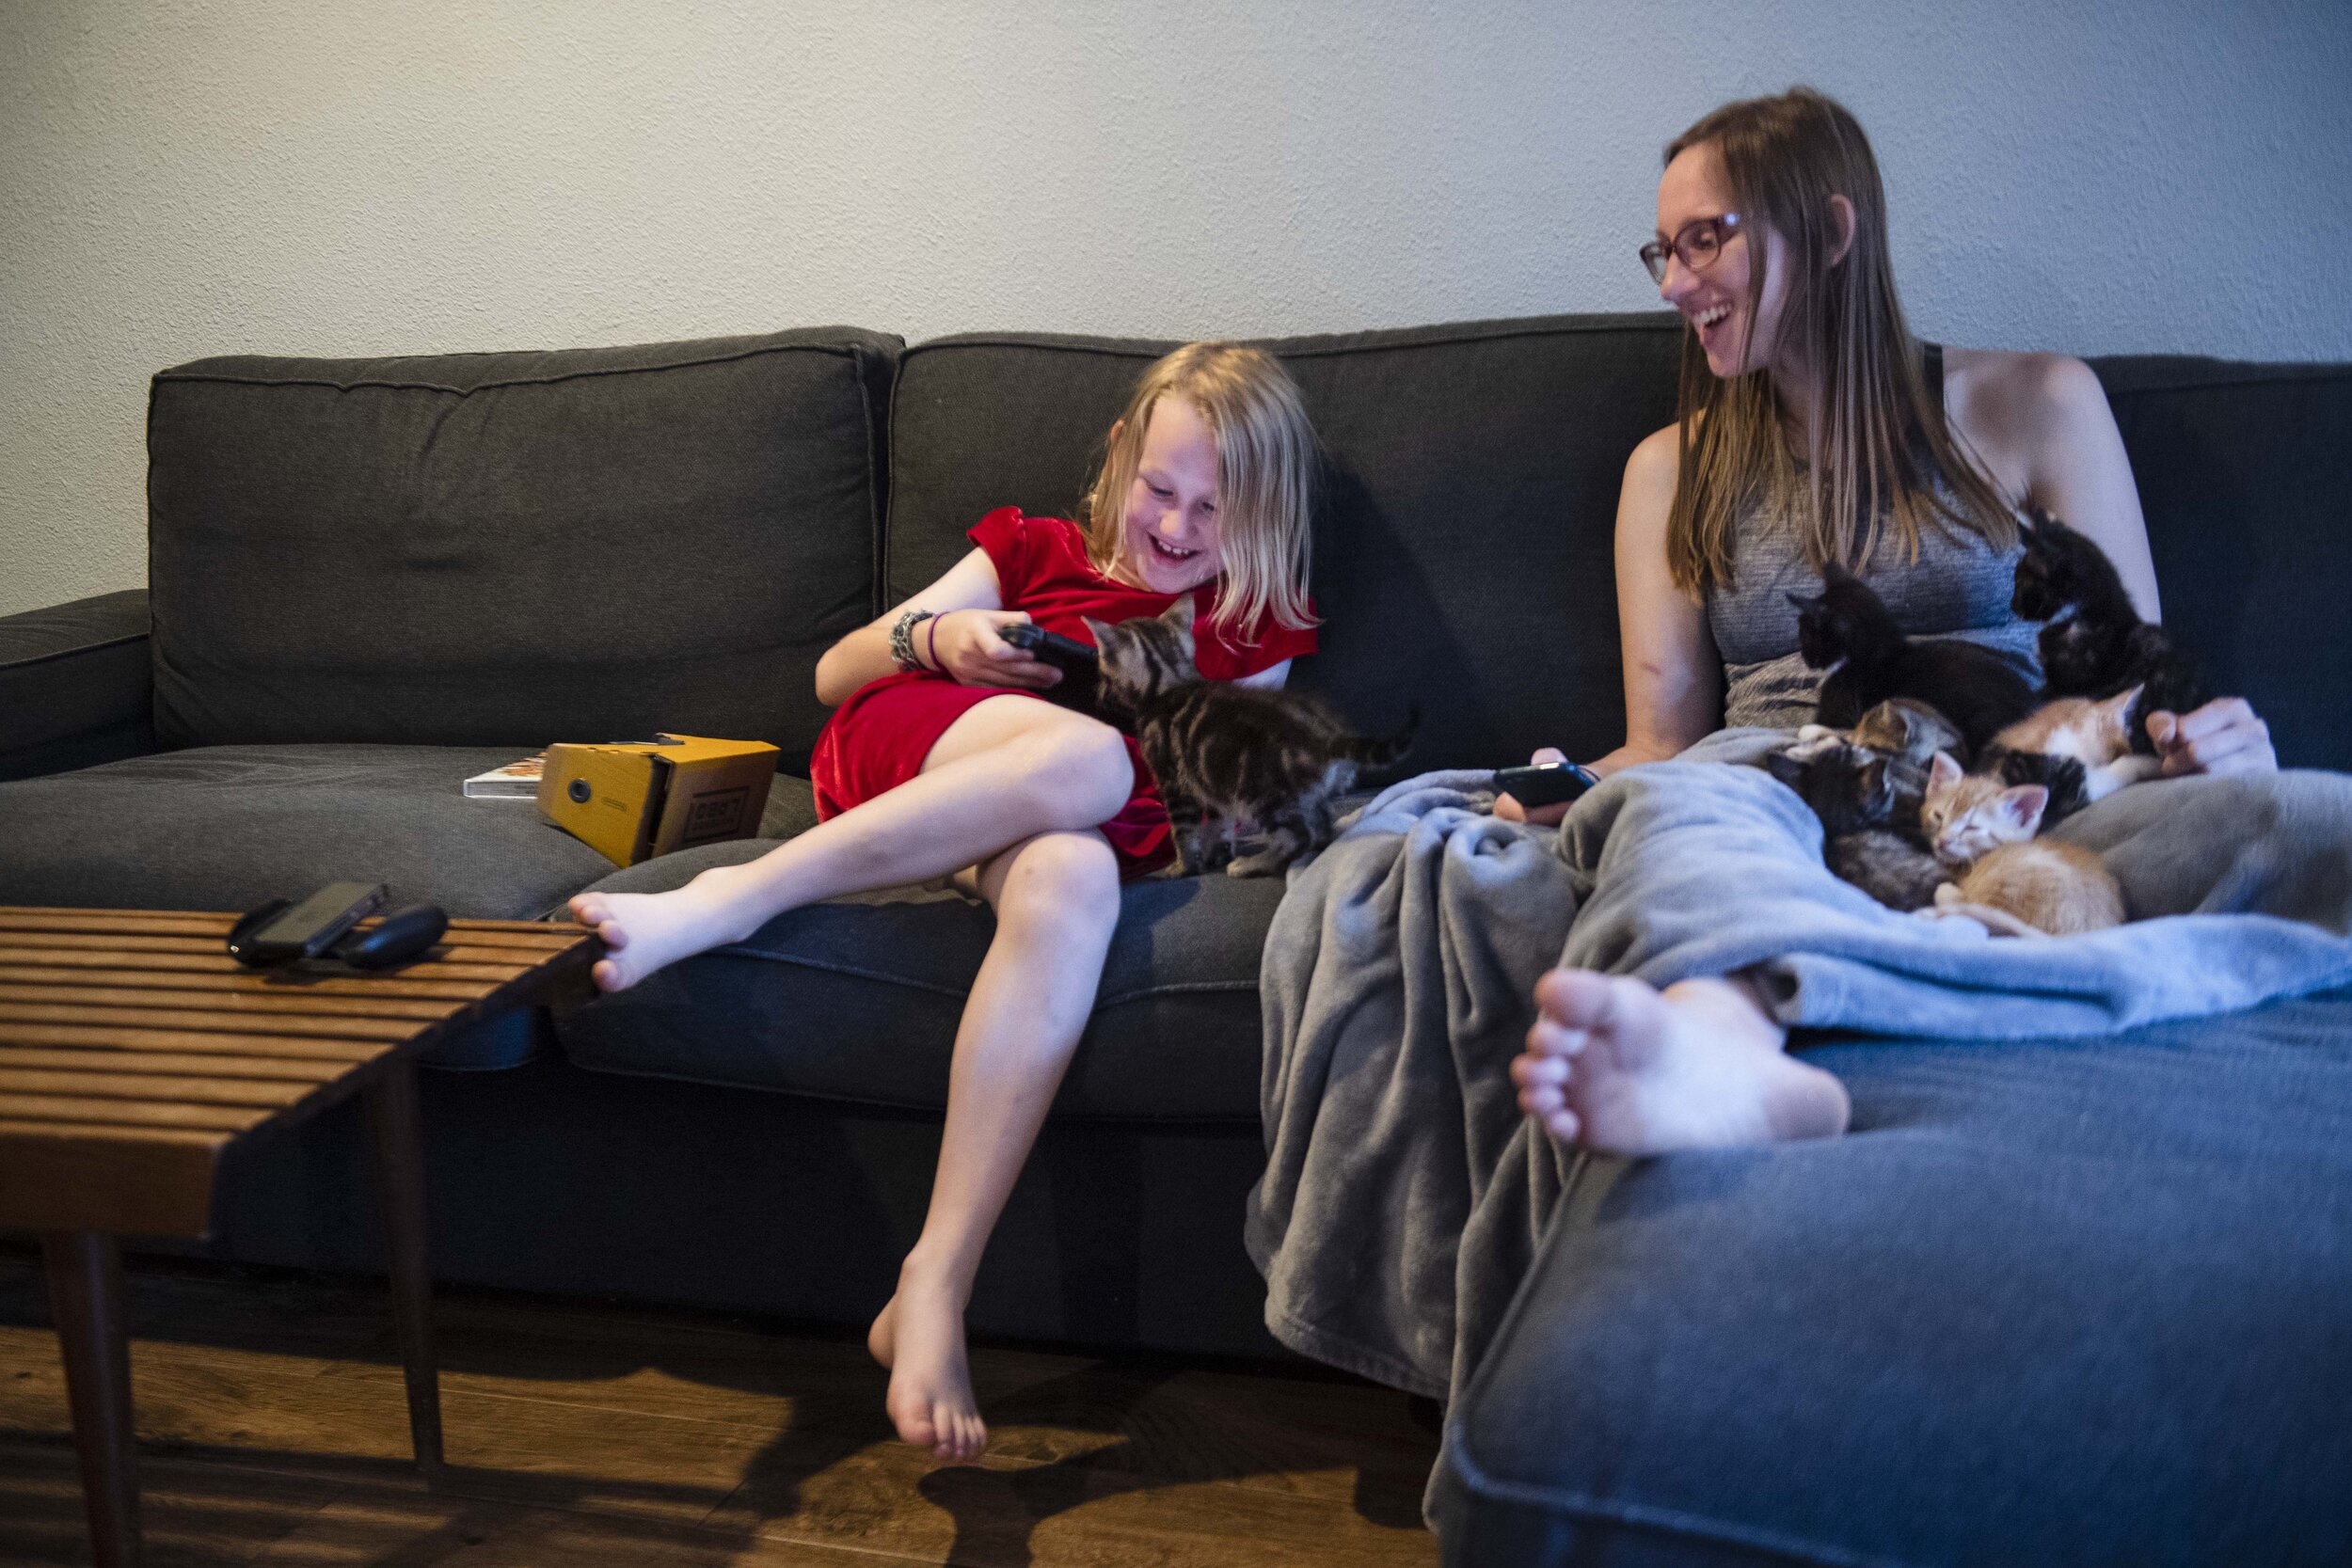  Keegan, a gender creative child, 9, says he "feels more like himself," when he is wearing a dress.  Keegan, plays video games with his mother Megan, 33, at their home in Austin, Texas, U.S., May 17, 2019.    Though Keegan has only performed in drag 